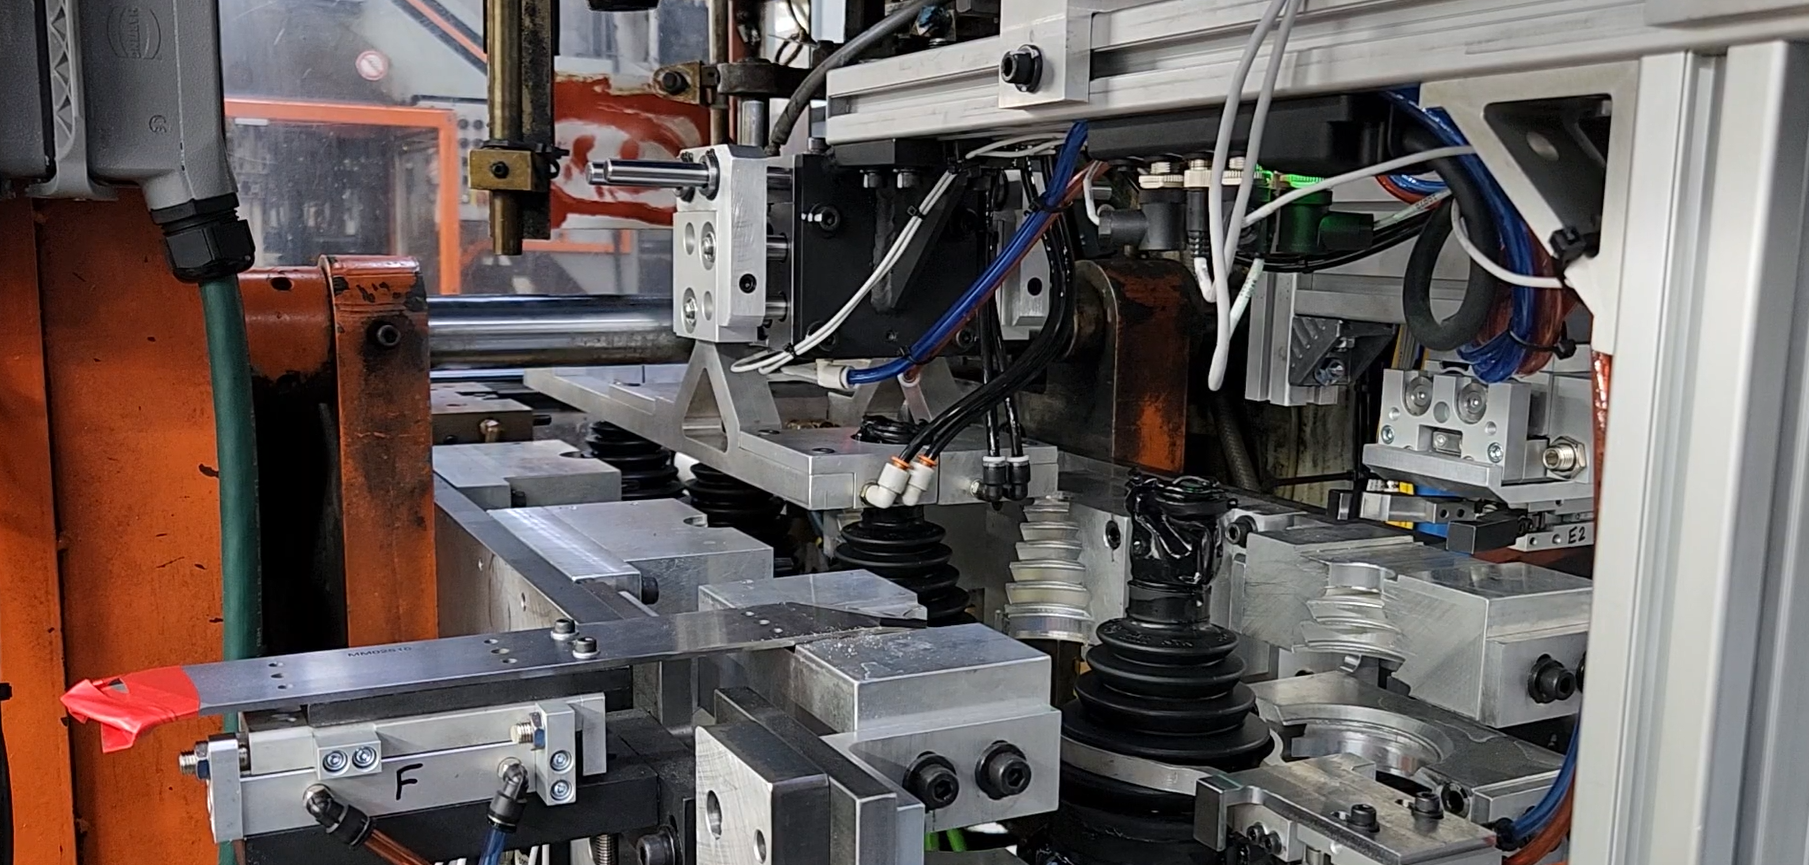 An image of a Linear Automation system that trims and moves rubber through a specialized machine.